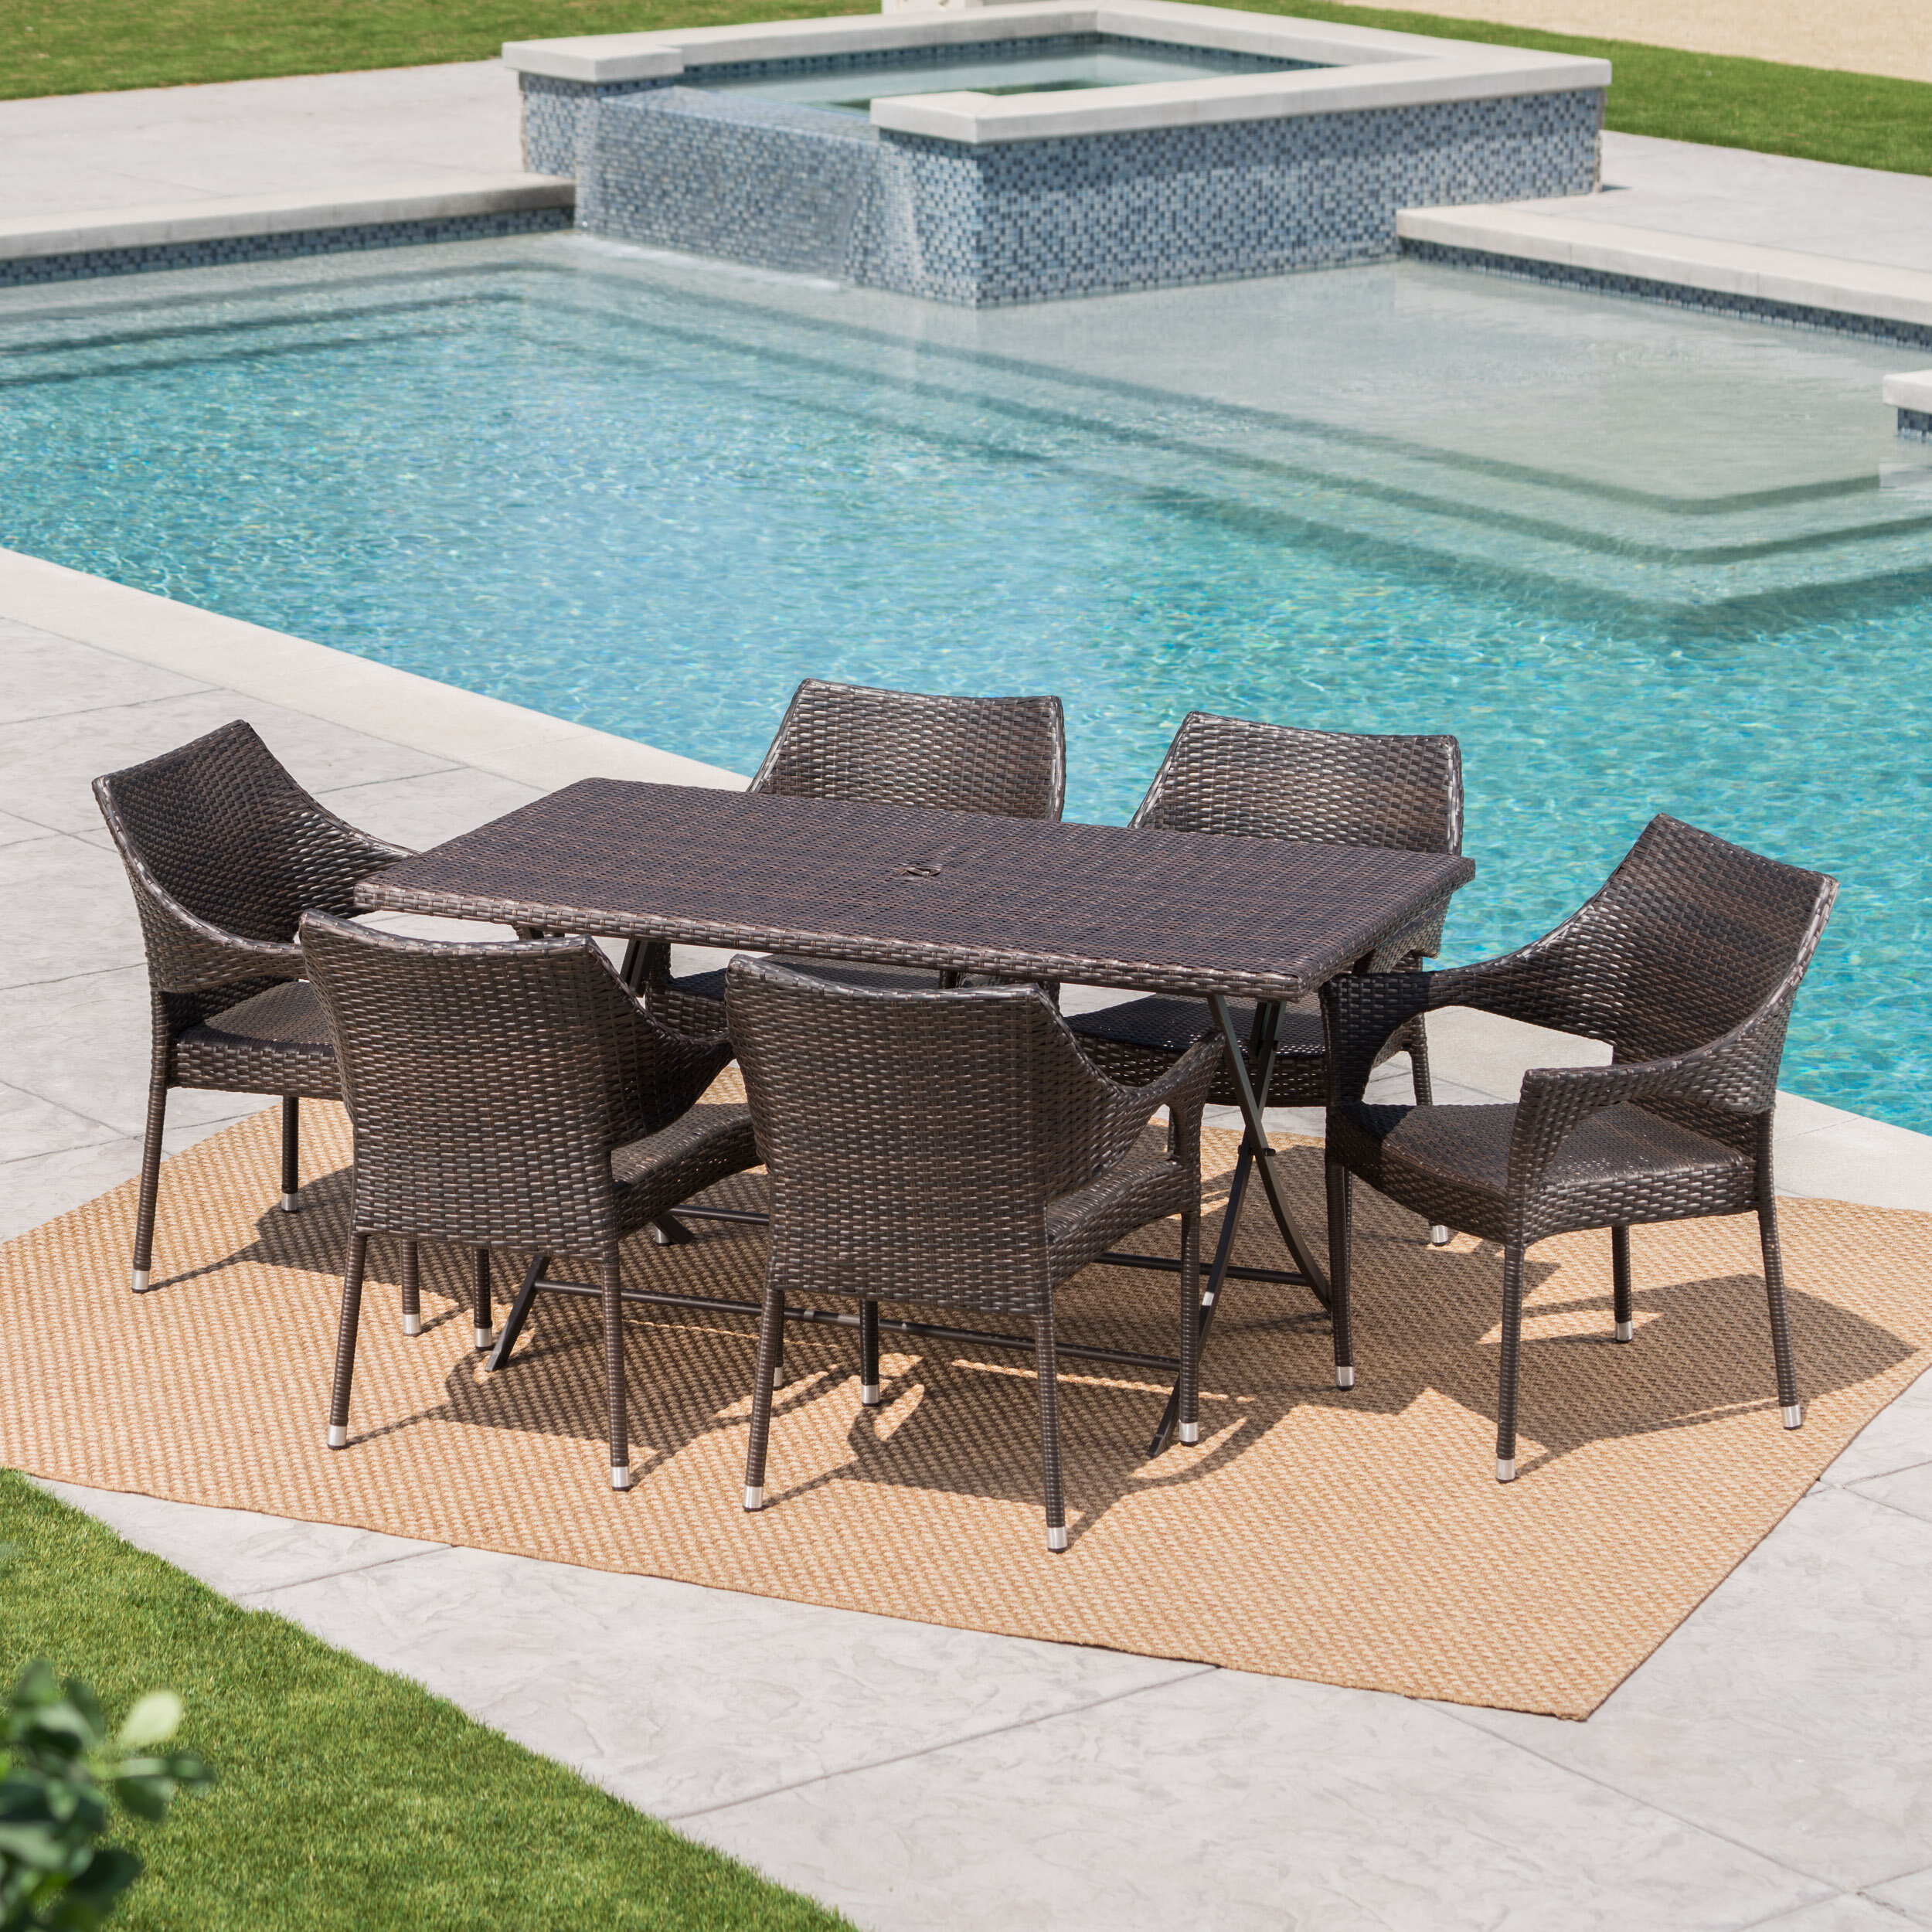 Outdoor Wicker Table And Chairs / 11 Piece Outdoor Rattan Wicker Patio